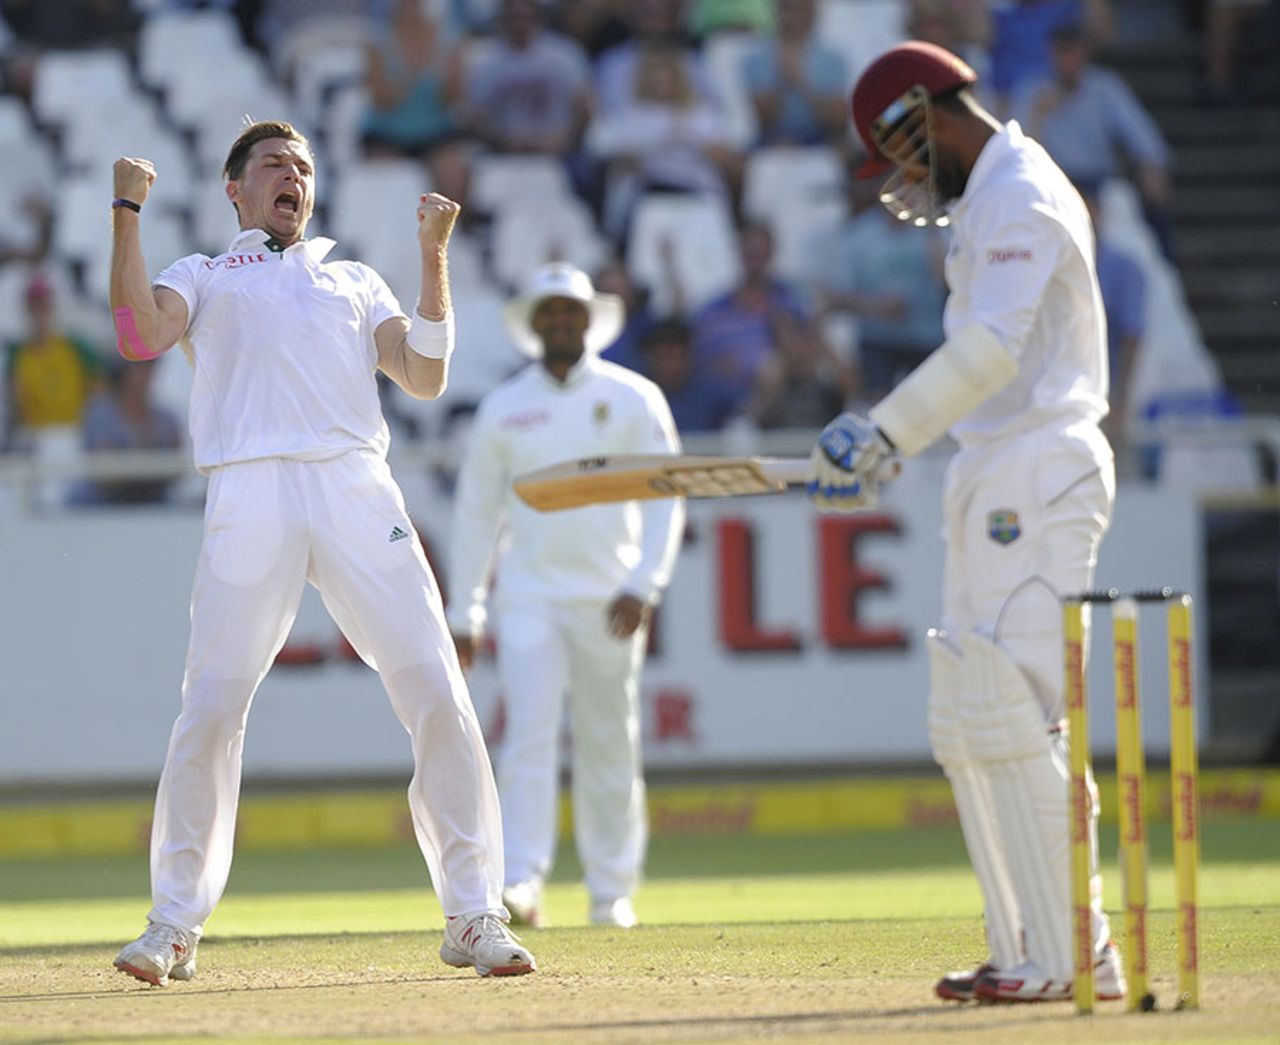 Dale Steyn roars at removing Denesh Ramdin, South Africa v West Indies, 3rd Test, Cape Town, 4th day, January 5, 2014